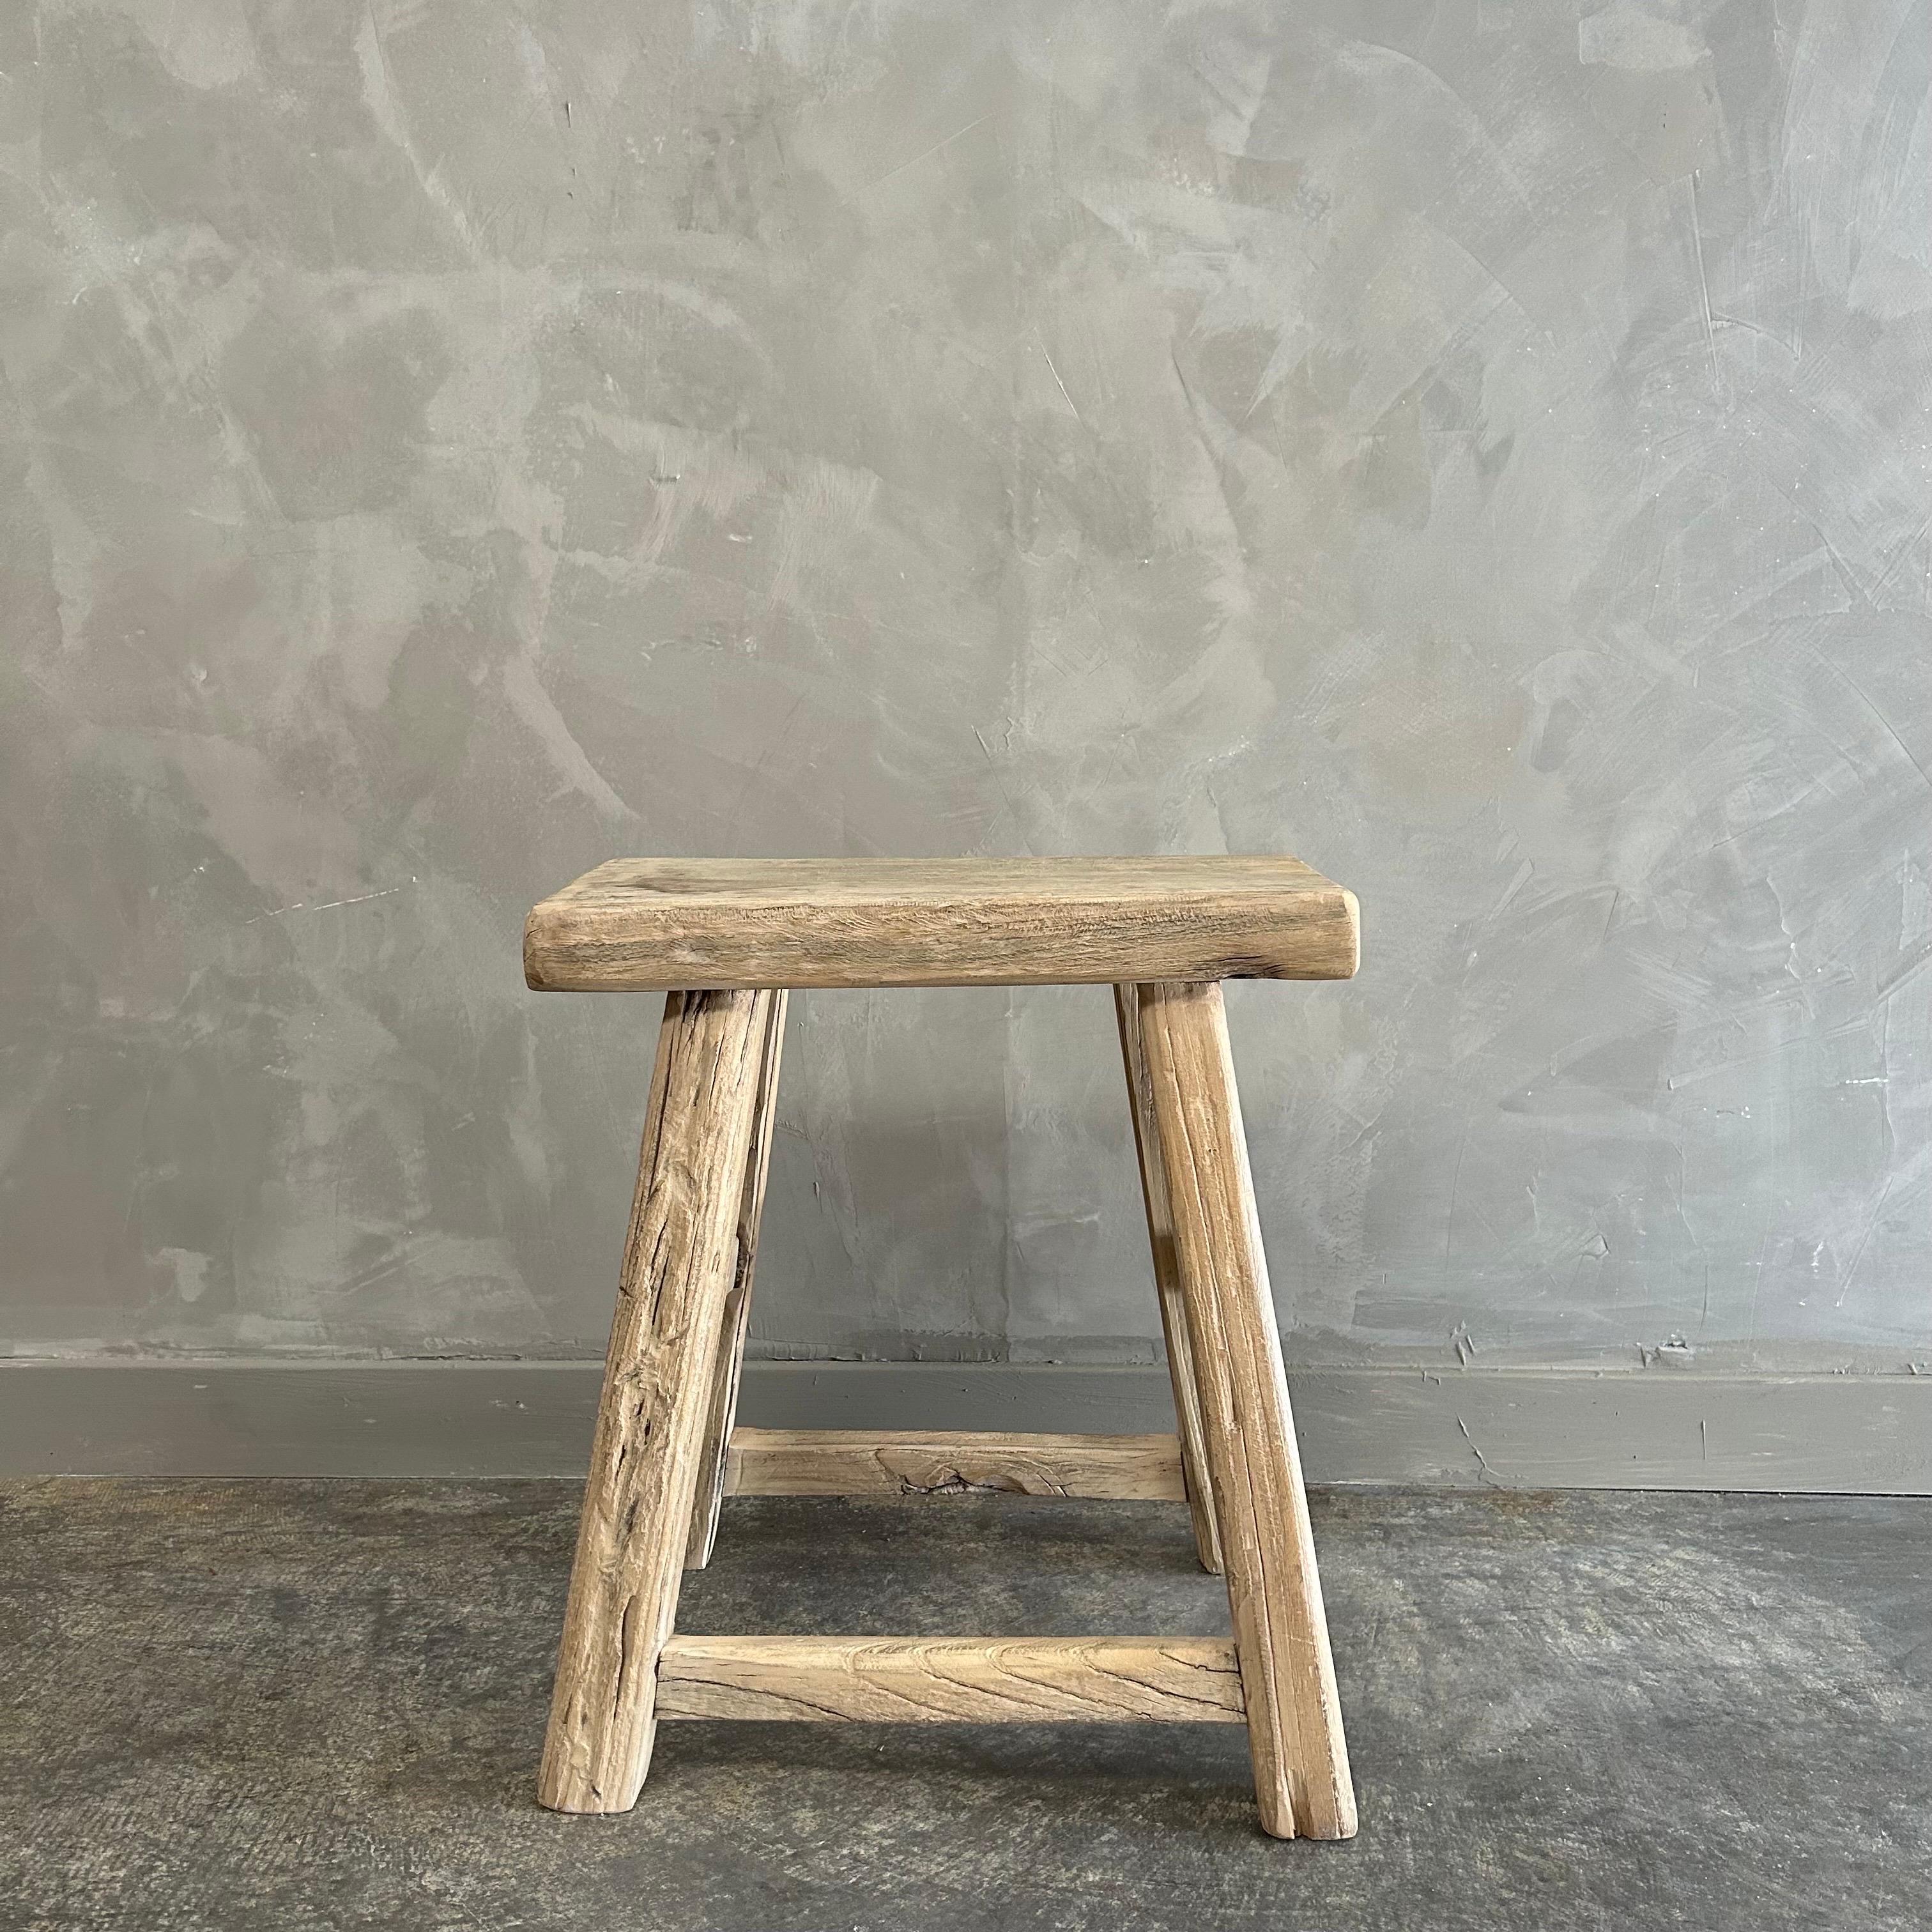 Welcome to bloomhomeinc we stock over 2000 items, please scroll down and click view sellers other items to see more!
Size:  18”w x 12”d x 20”h
SD:9”
Vintage Antique Elm Wood stool made from vintage reclaimed elm wood. Beautiful antique patina, with